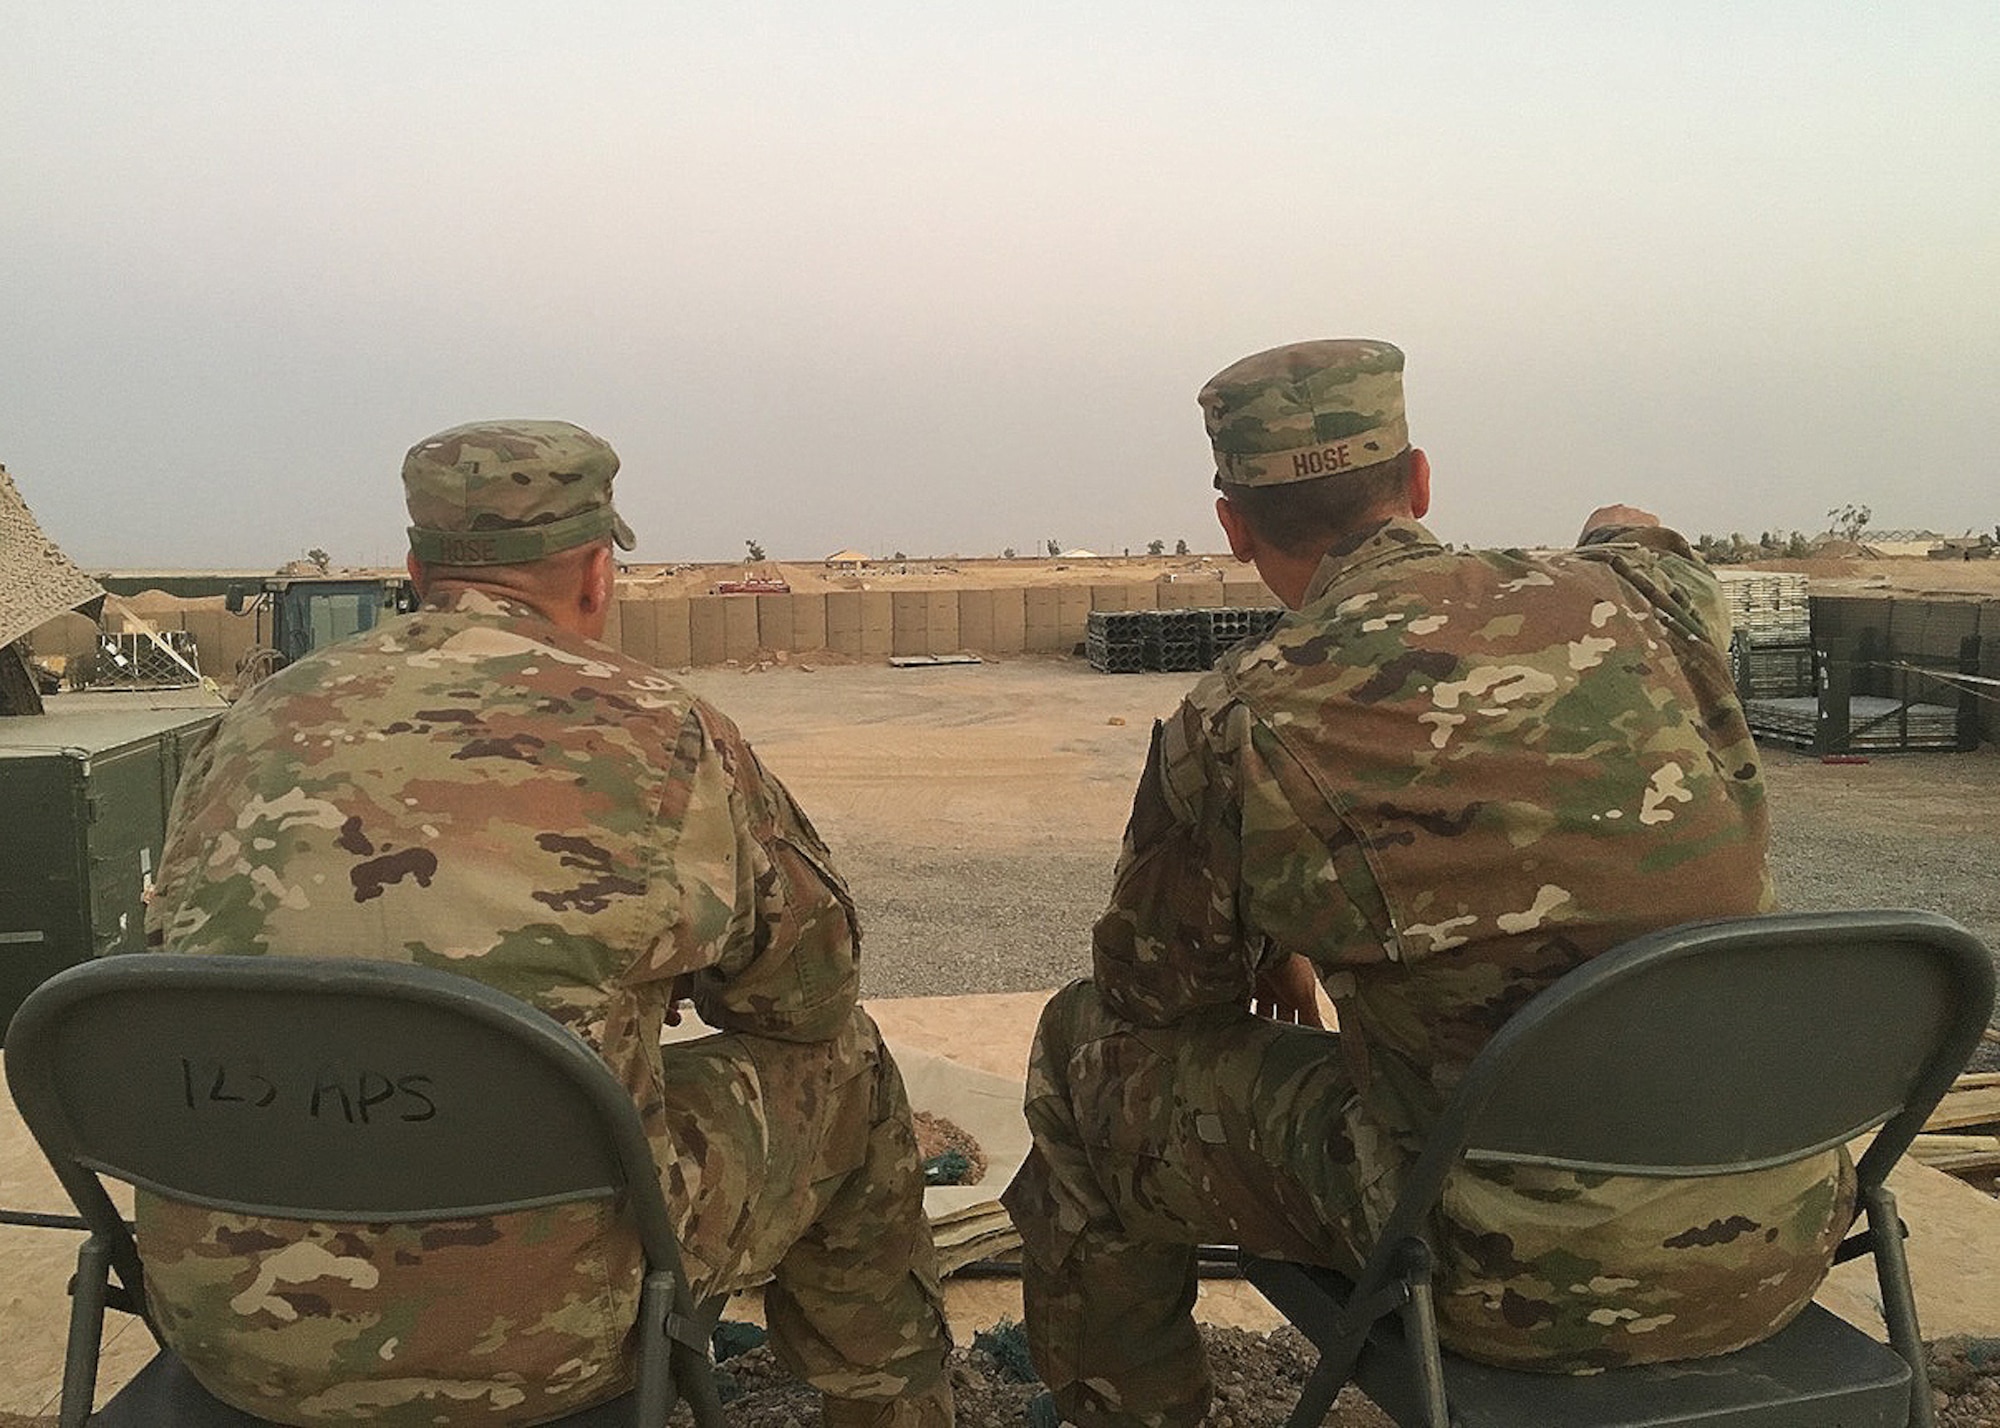 The twin brothers are both deployed to Iraq in support of Combined Joint Task Force -Operation Inherent Resolve. CJTF-OIR is the global Coalition to defeat ISIS in Iraq and Syria.